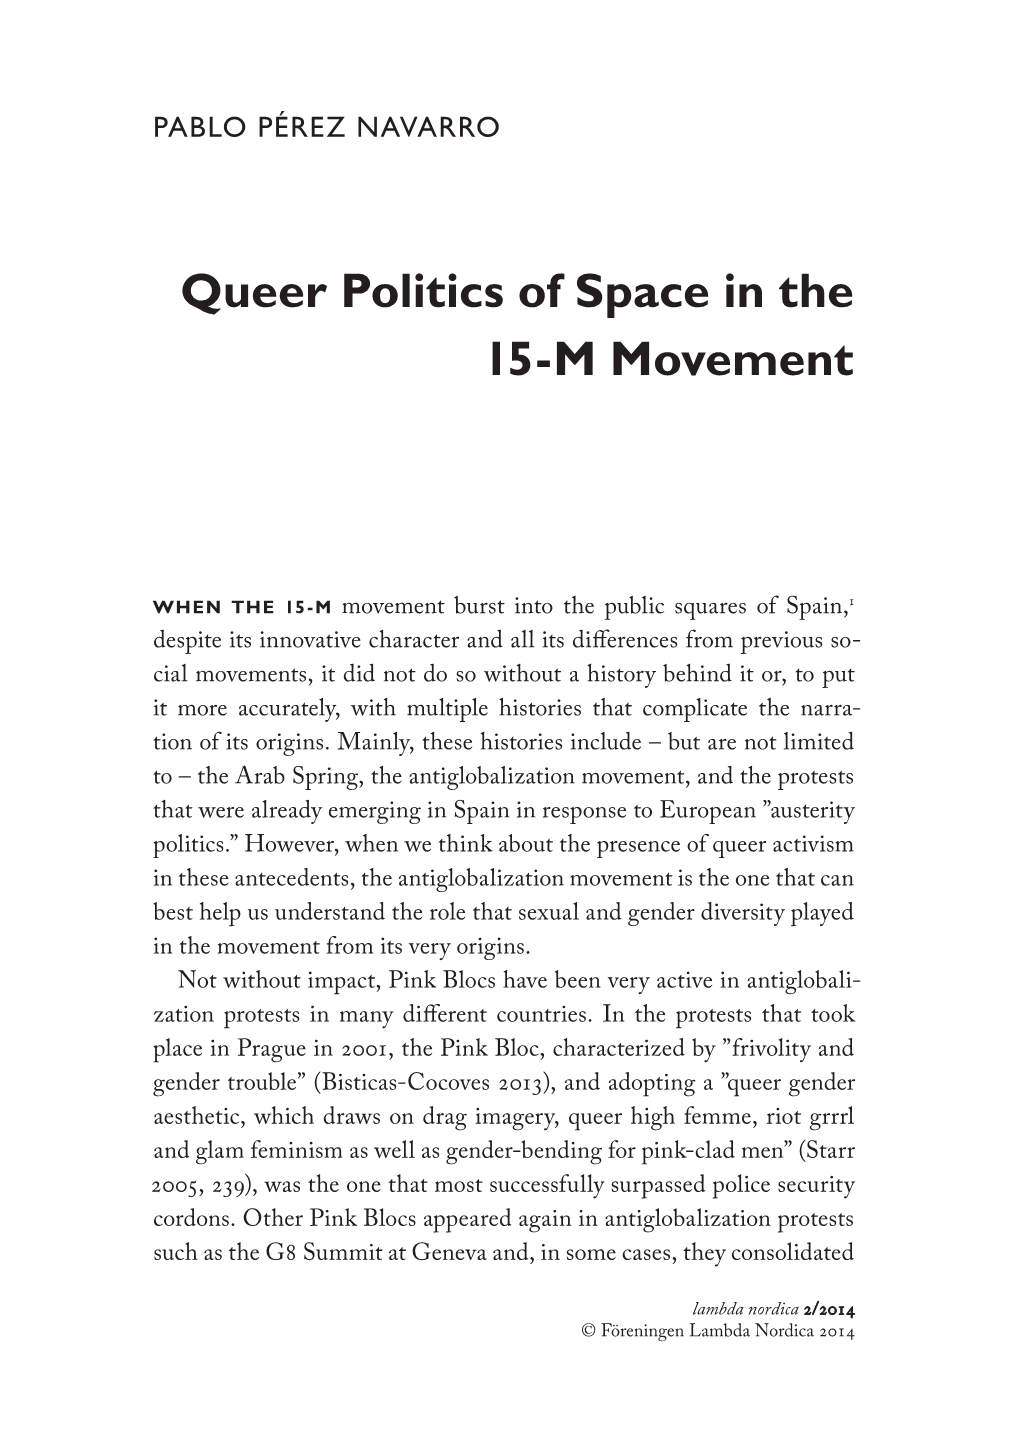 Queer Politics of Space in the 15-M Movement